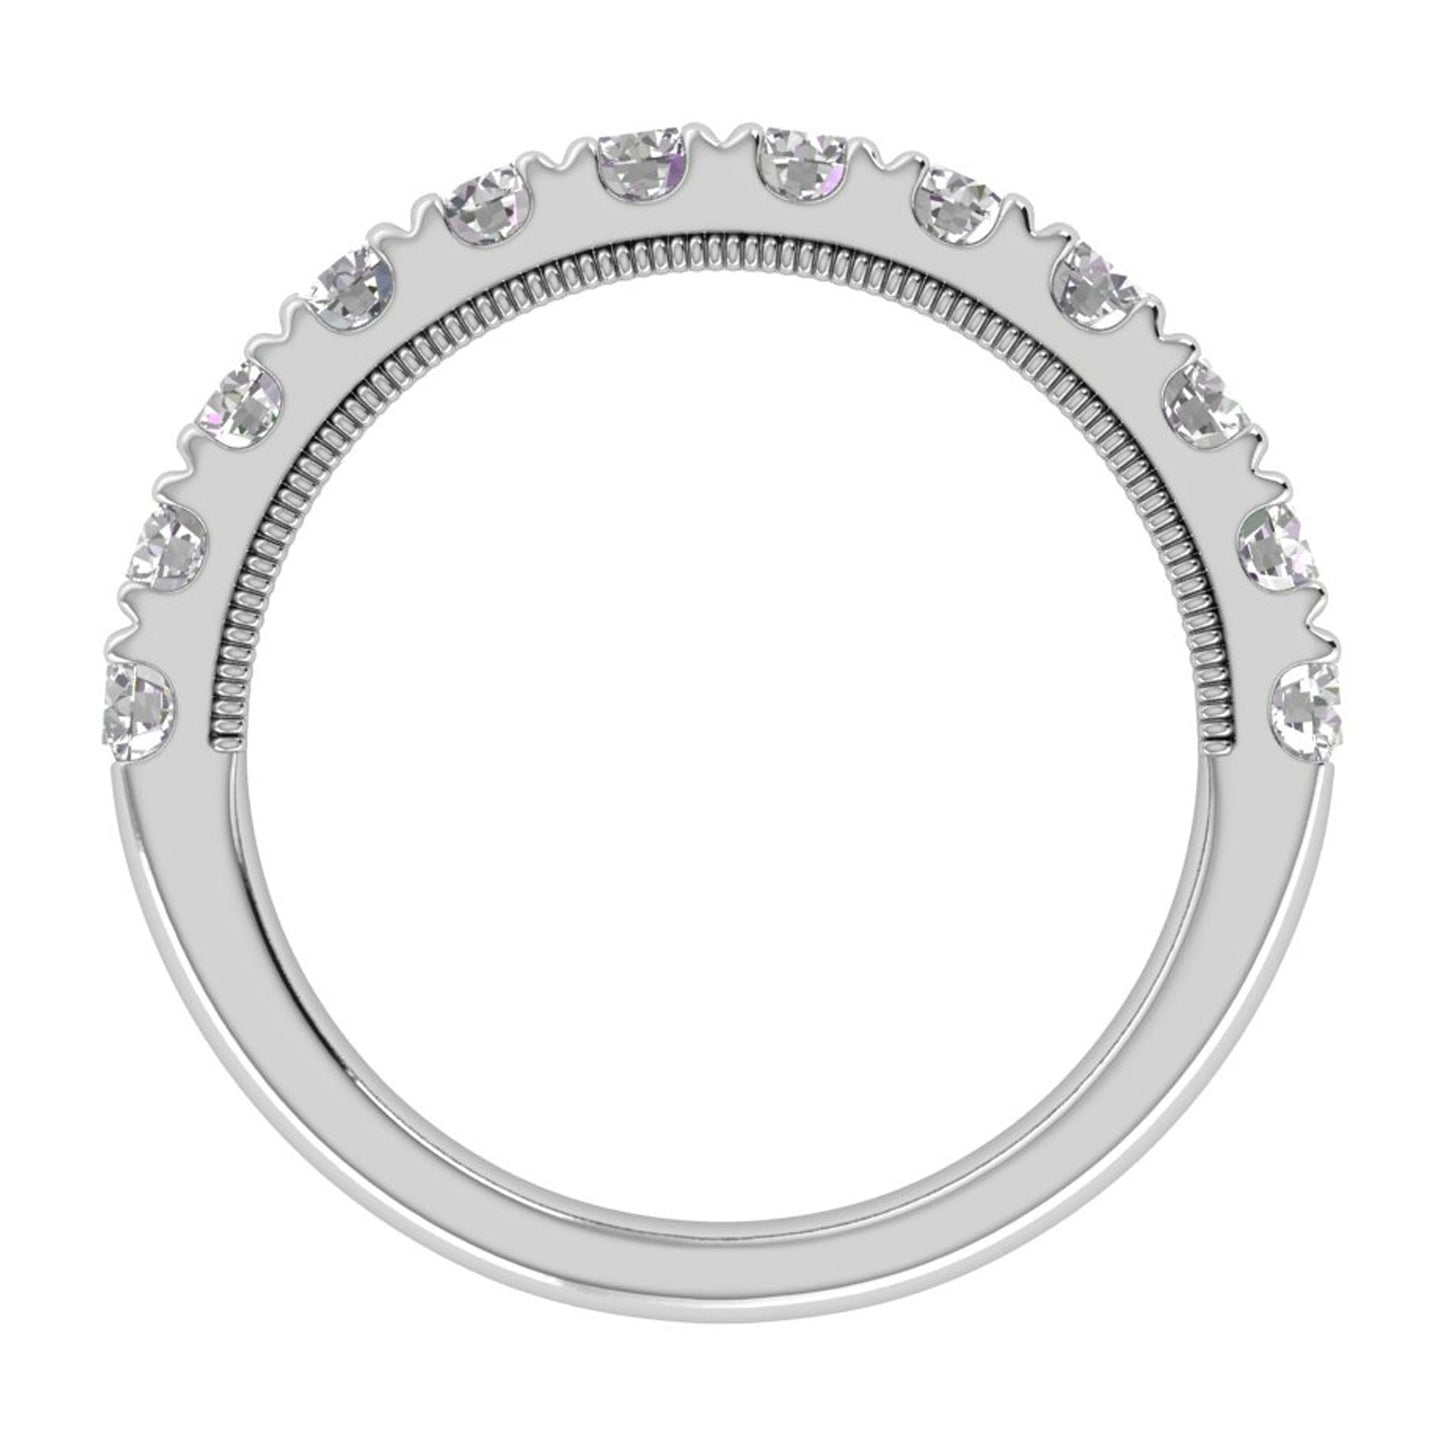 1 CTW COLORLESS FLAWLESS FRENCH PAVÉ WITH MILGRAIN WEDDING BAND